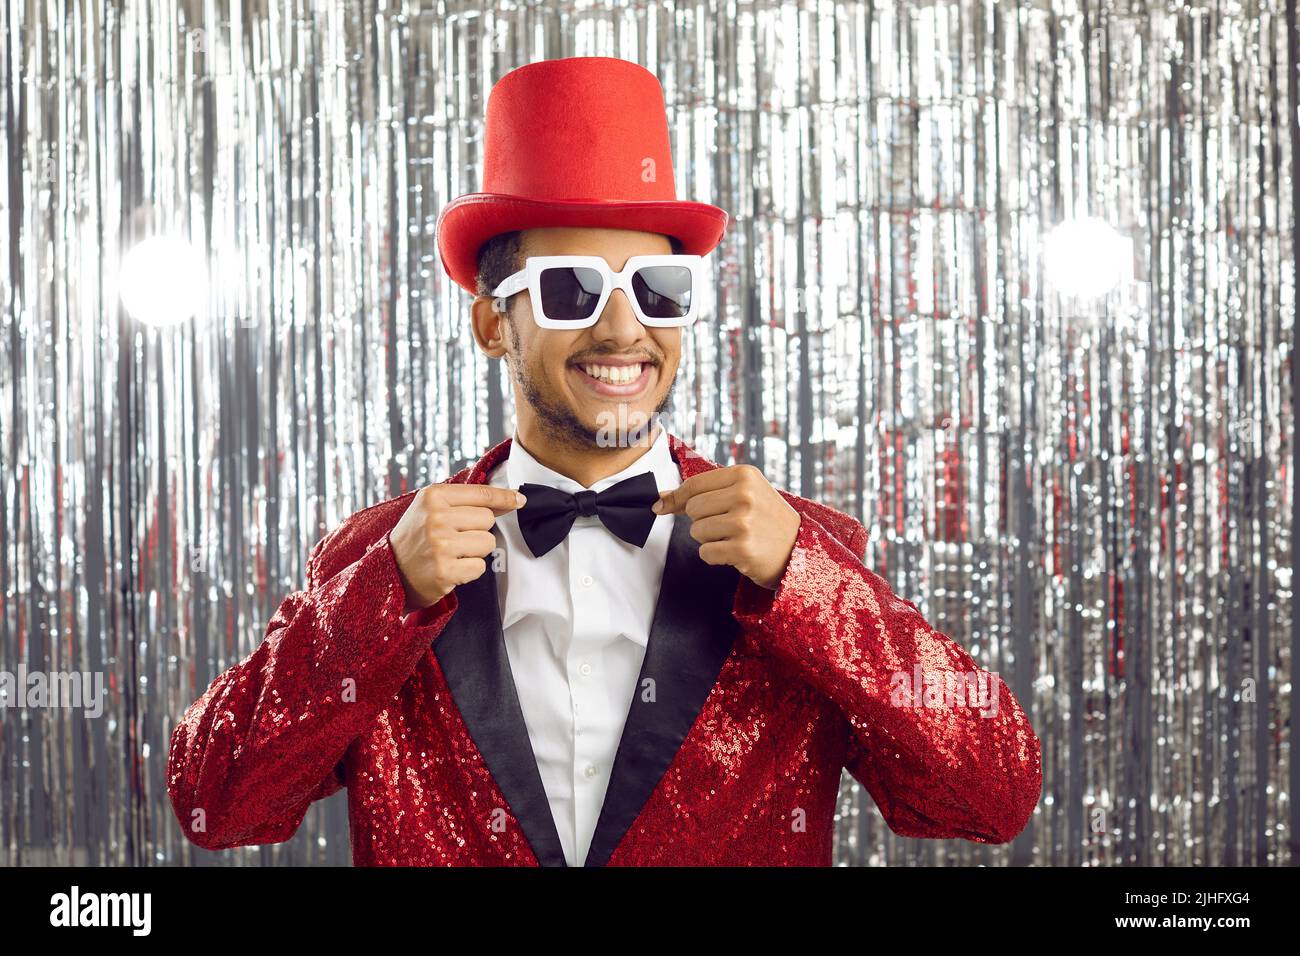 Funny guy in red sequin party suit, top hat and sunglasses smiles and fixes his bowtie Stock Photo